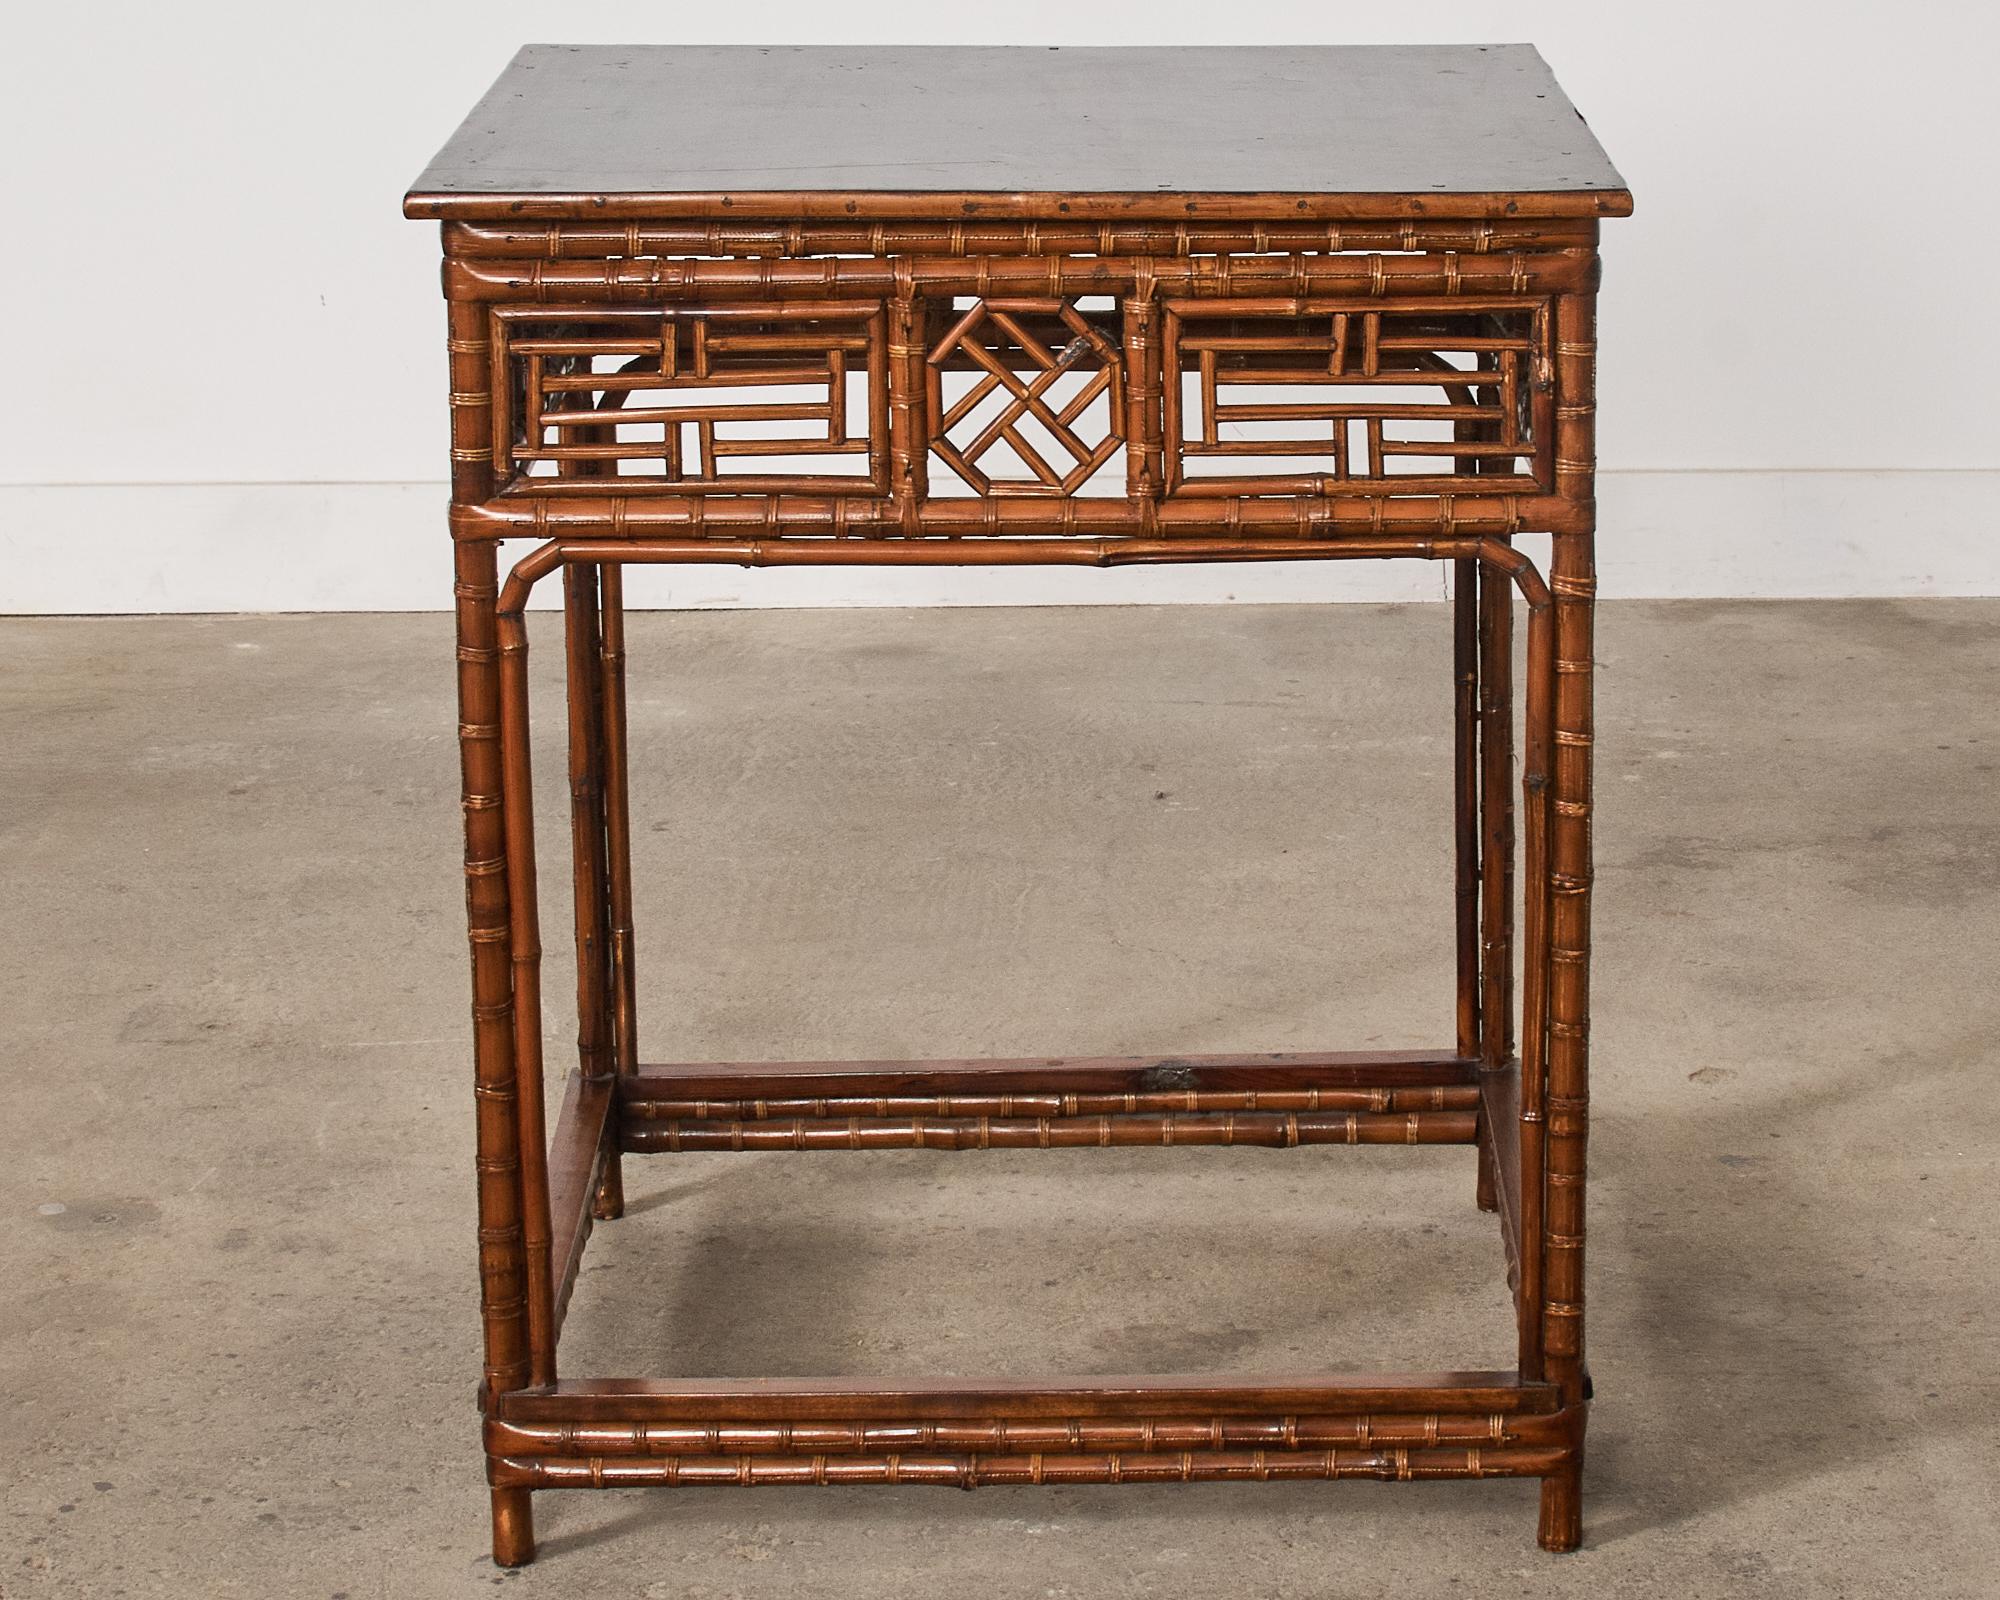 Chinese Export Bamboo Fretwork Square Center Table In Good Condition For Sale In Rio Vista, CA